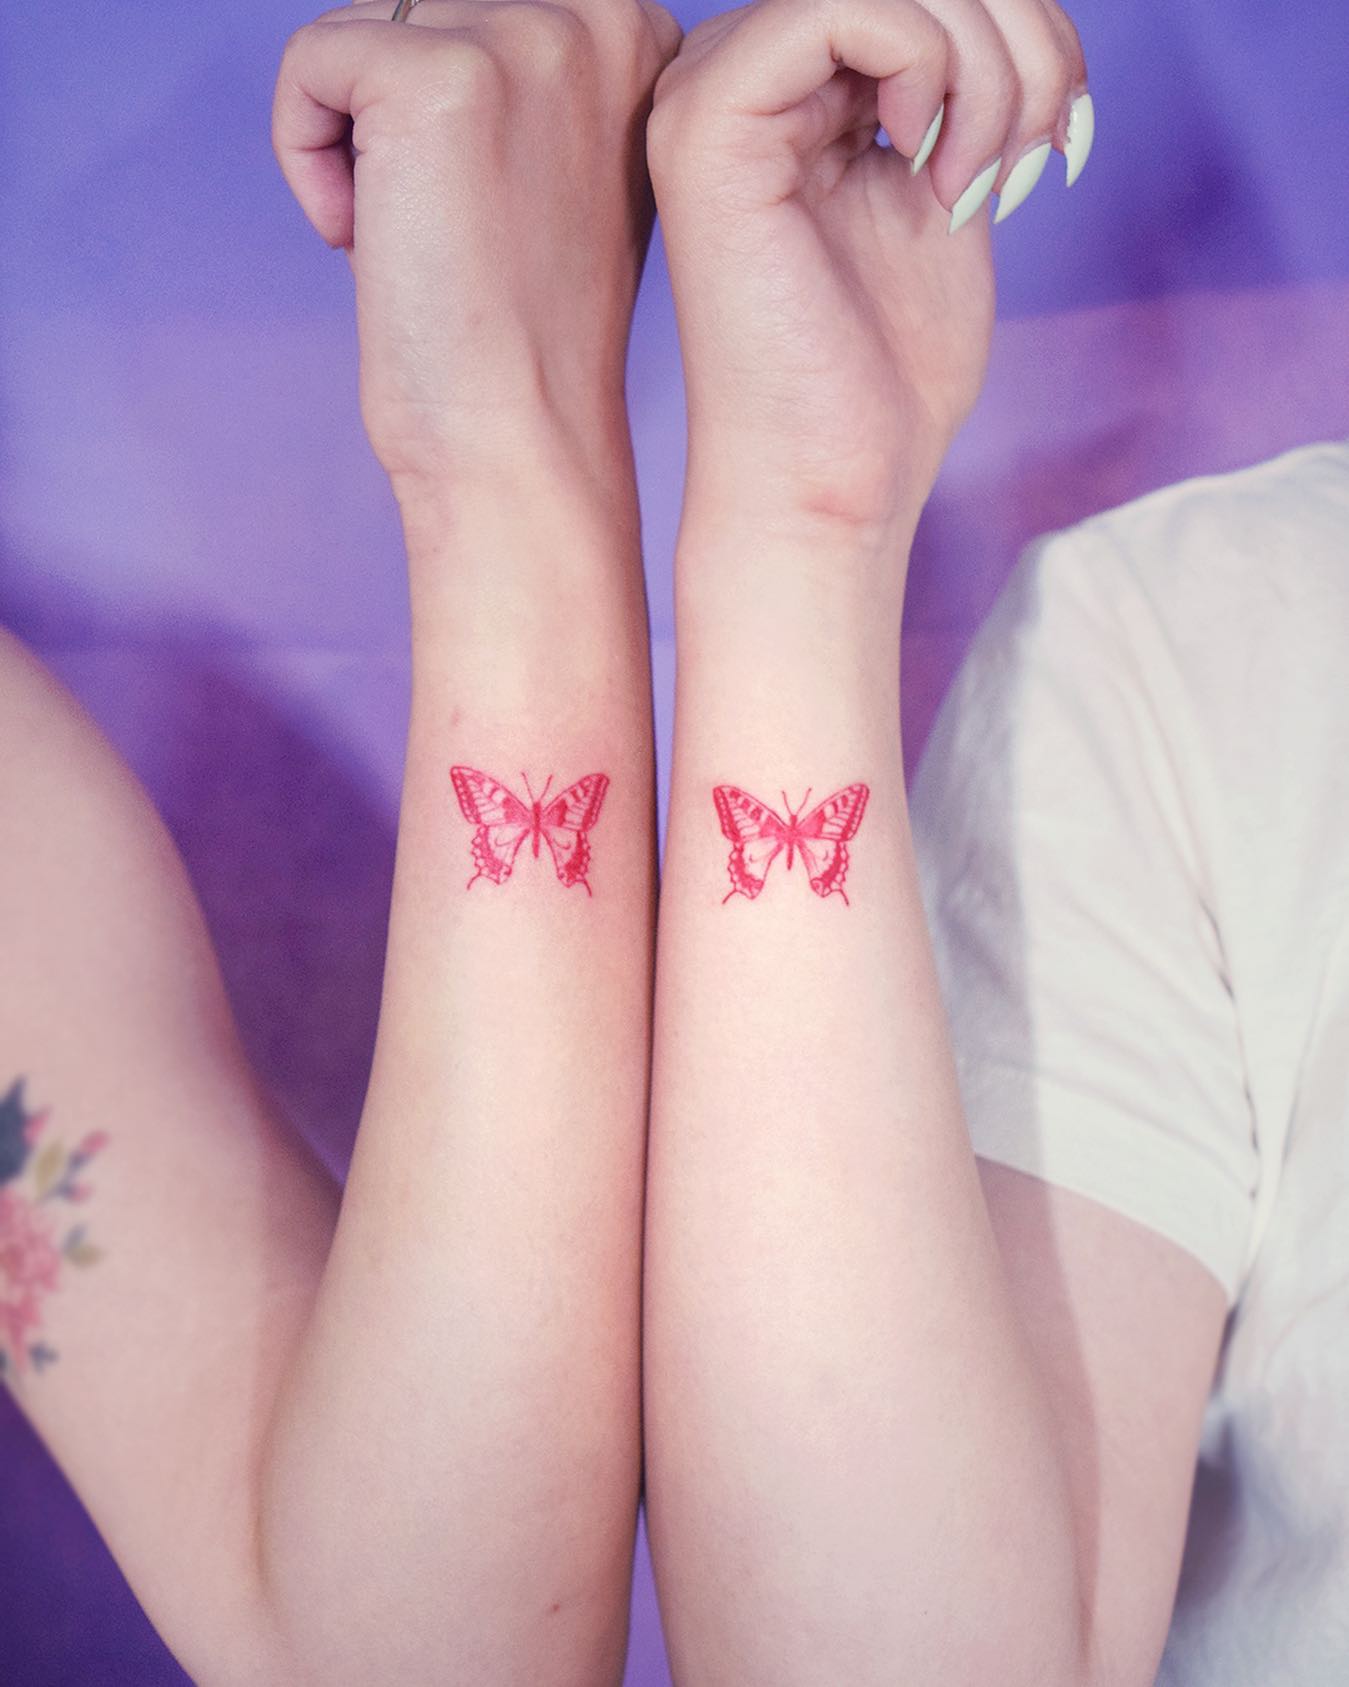 What does a red butterfly tattoo mean